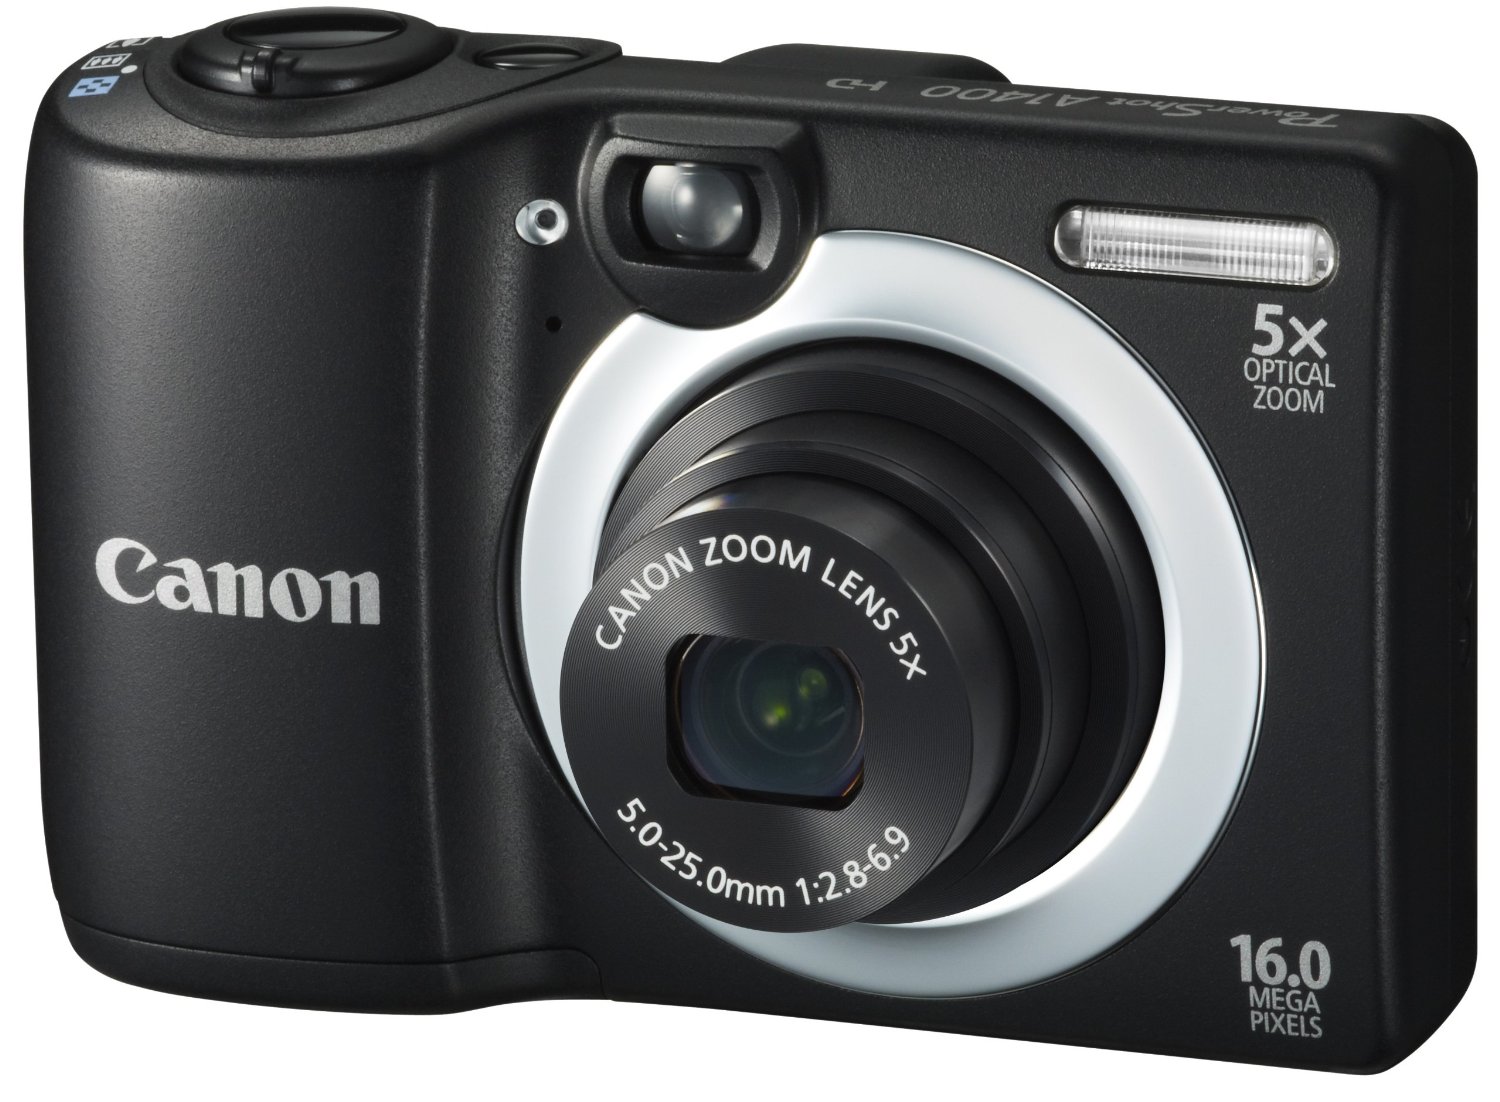 Canon PowerShot A1400 16.0 MP Digital Camera with 5x Digital Image Stabilized Zoom 28mm Wide-Angle Lens and 720p HD Video Recording (Black)